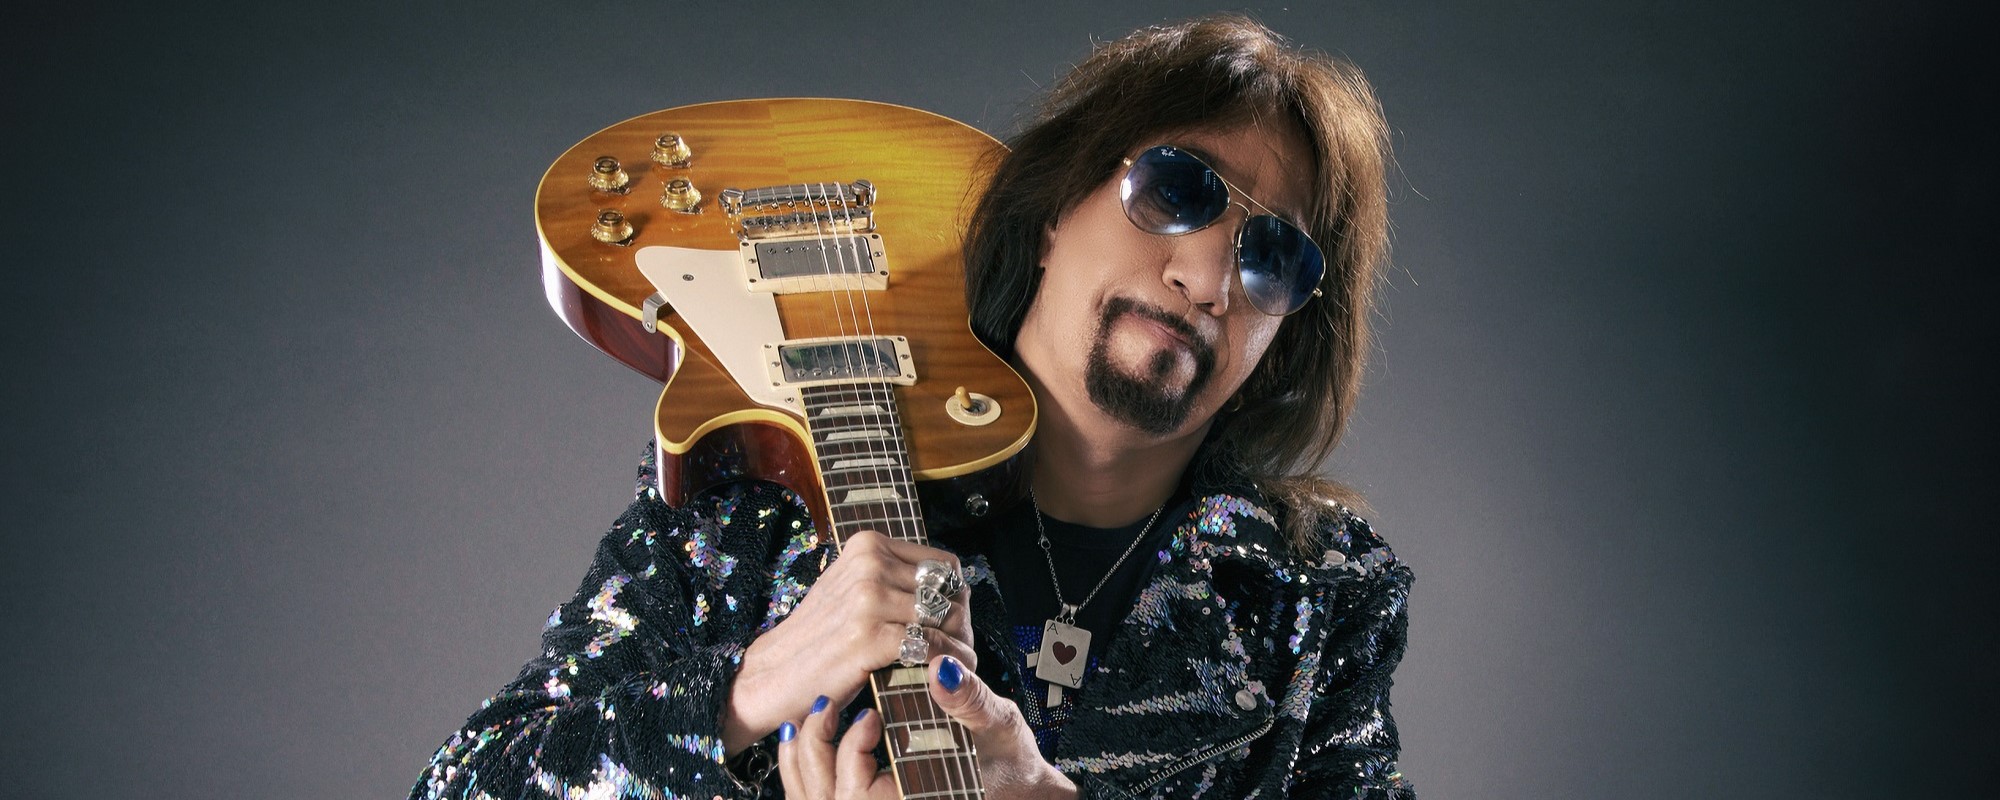 Ex-KISS Guitarist Ace Frehley Recalls Being Electrocuted Onstage in New Trailer for ‘10,000 Volts’ Solo Album